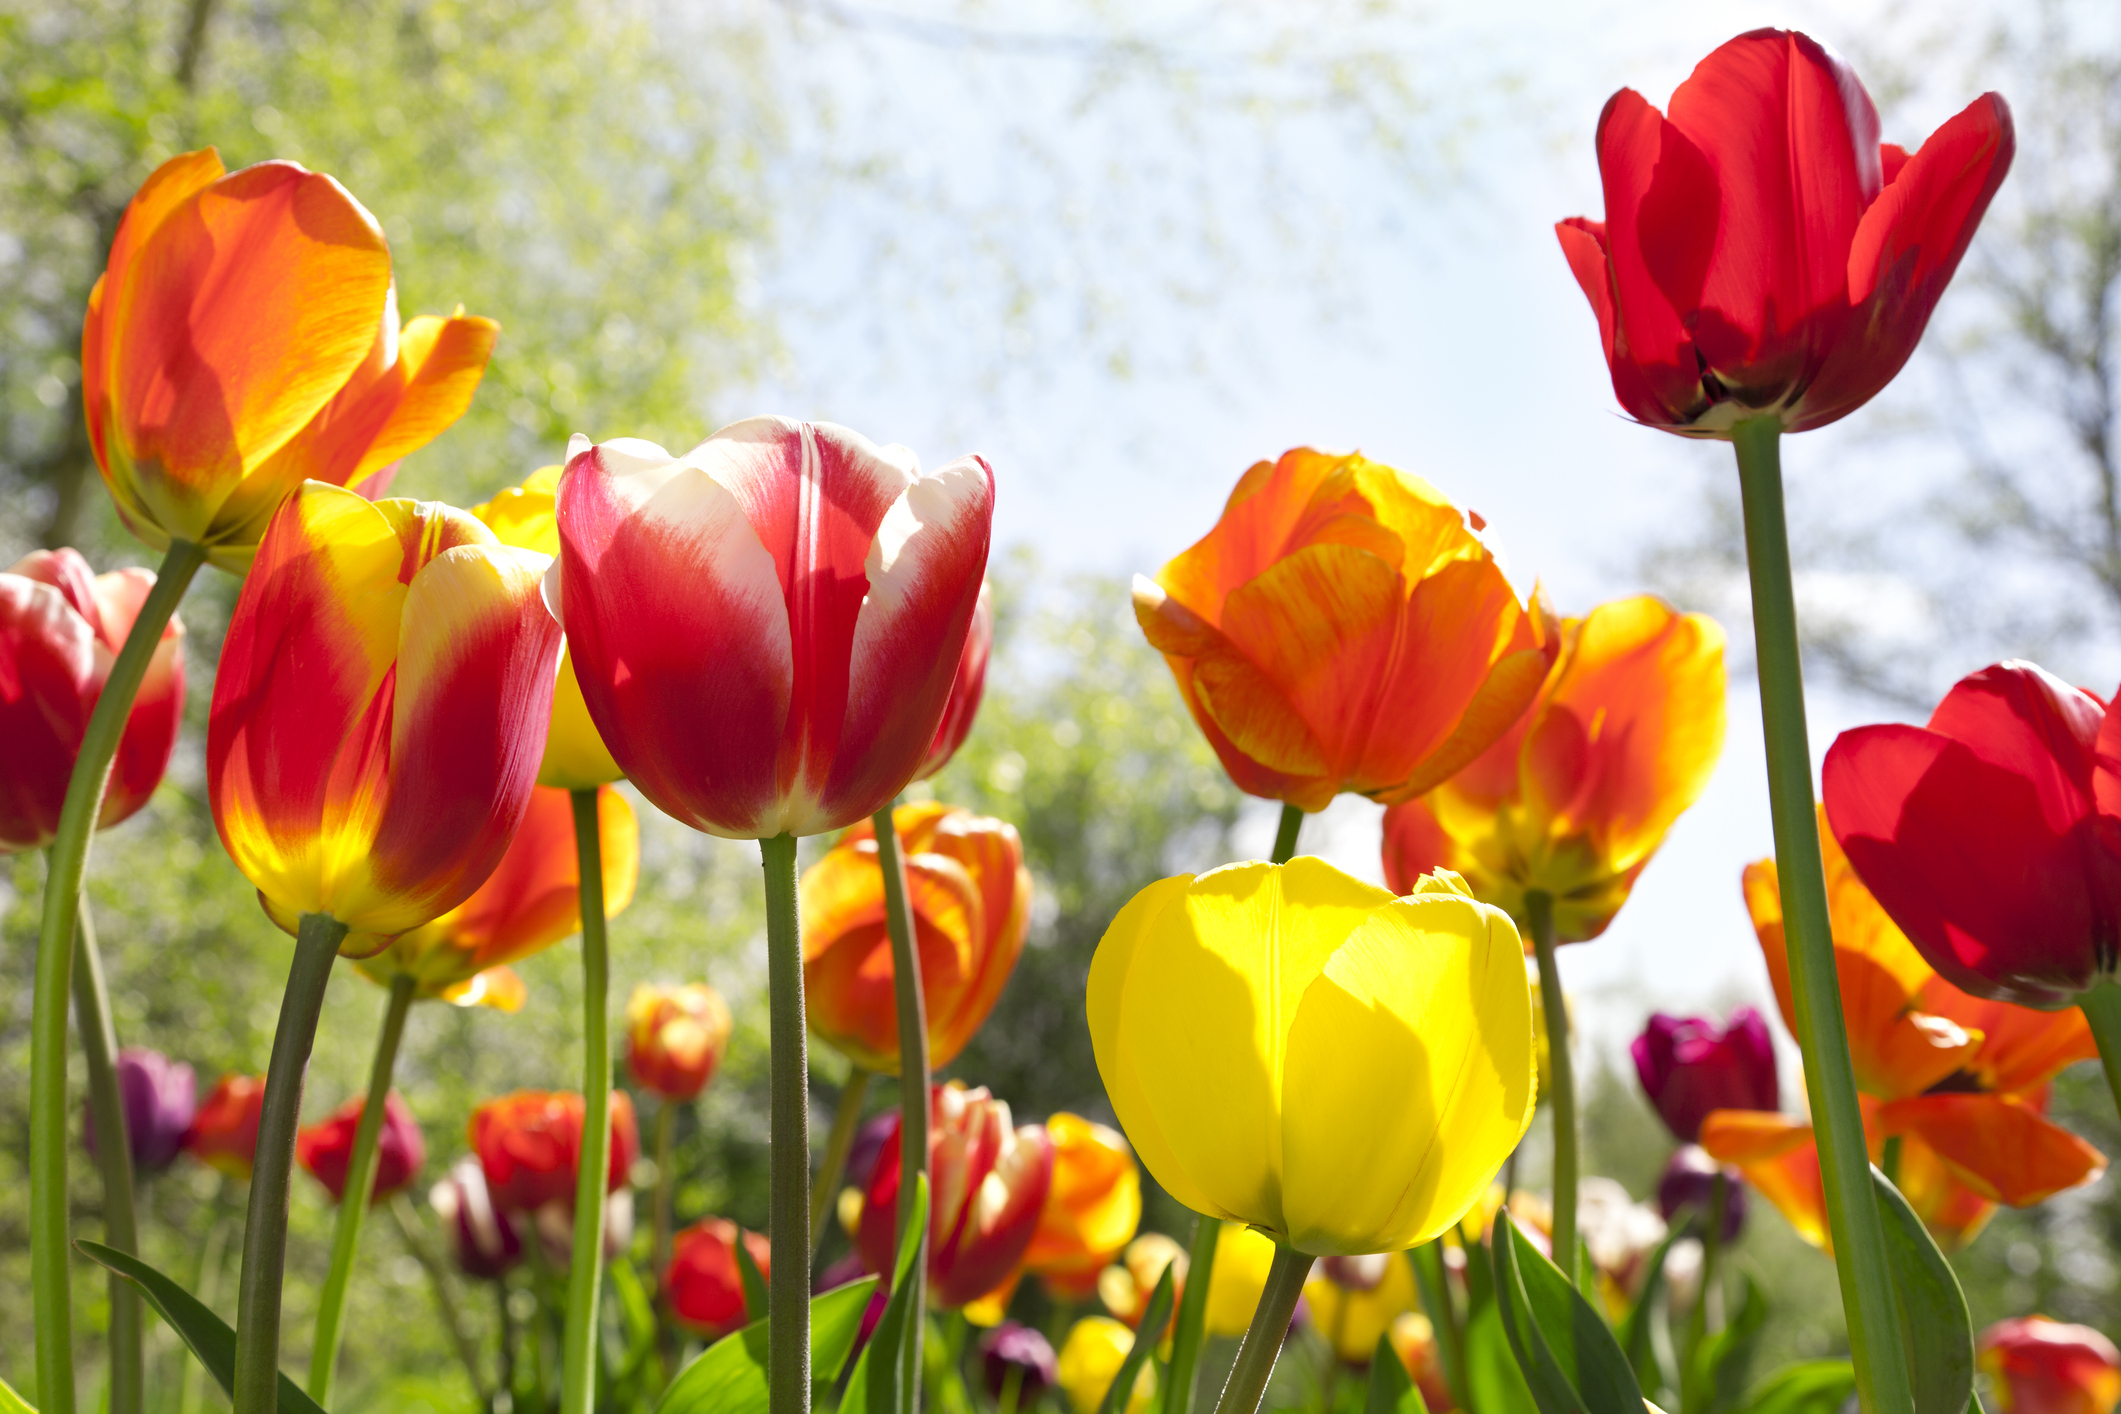 Chicago-Area Tulip Festival to Debut Sunday, Just in Time For Mothers Day